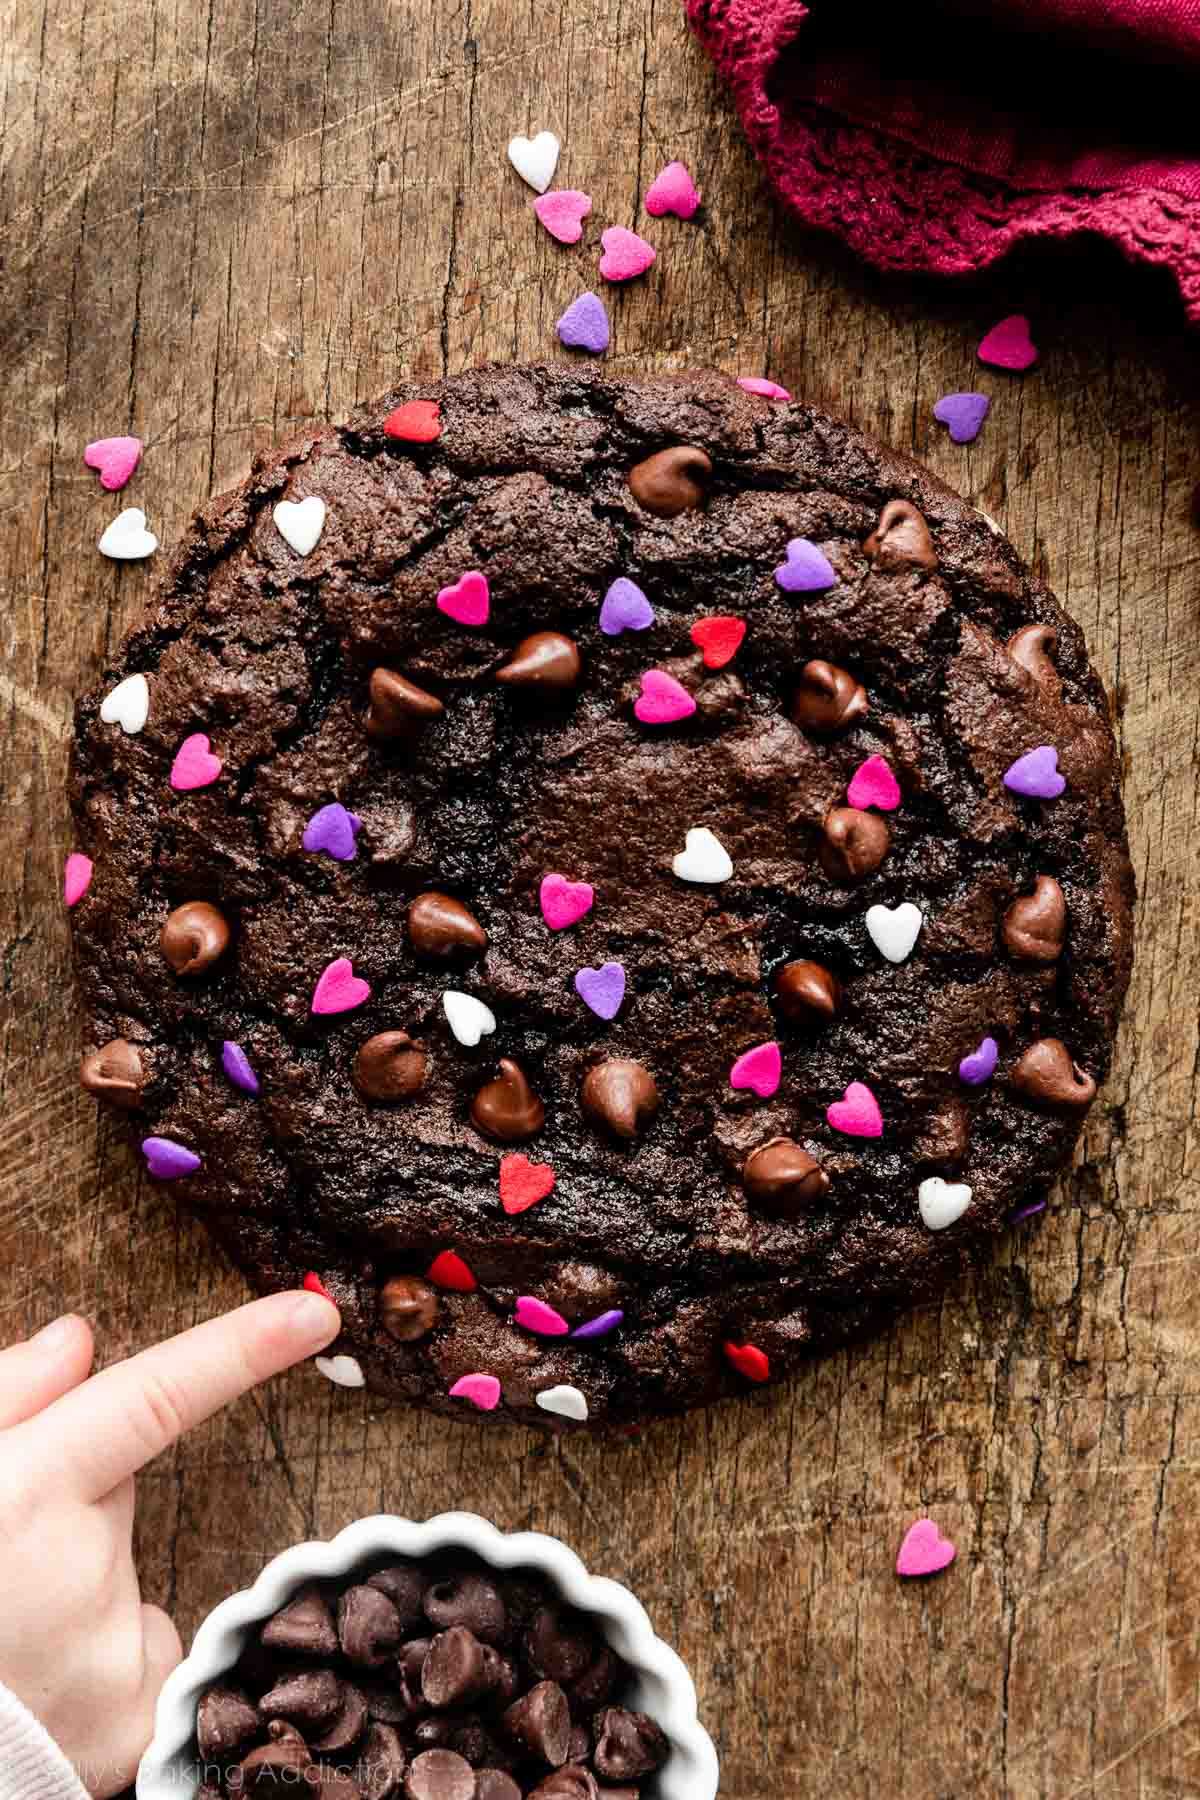 giant chocolate cookie with chocolate chips and Valentine's Day heart sprinkles on wooden cutting board with small hand pointing to it.